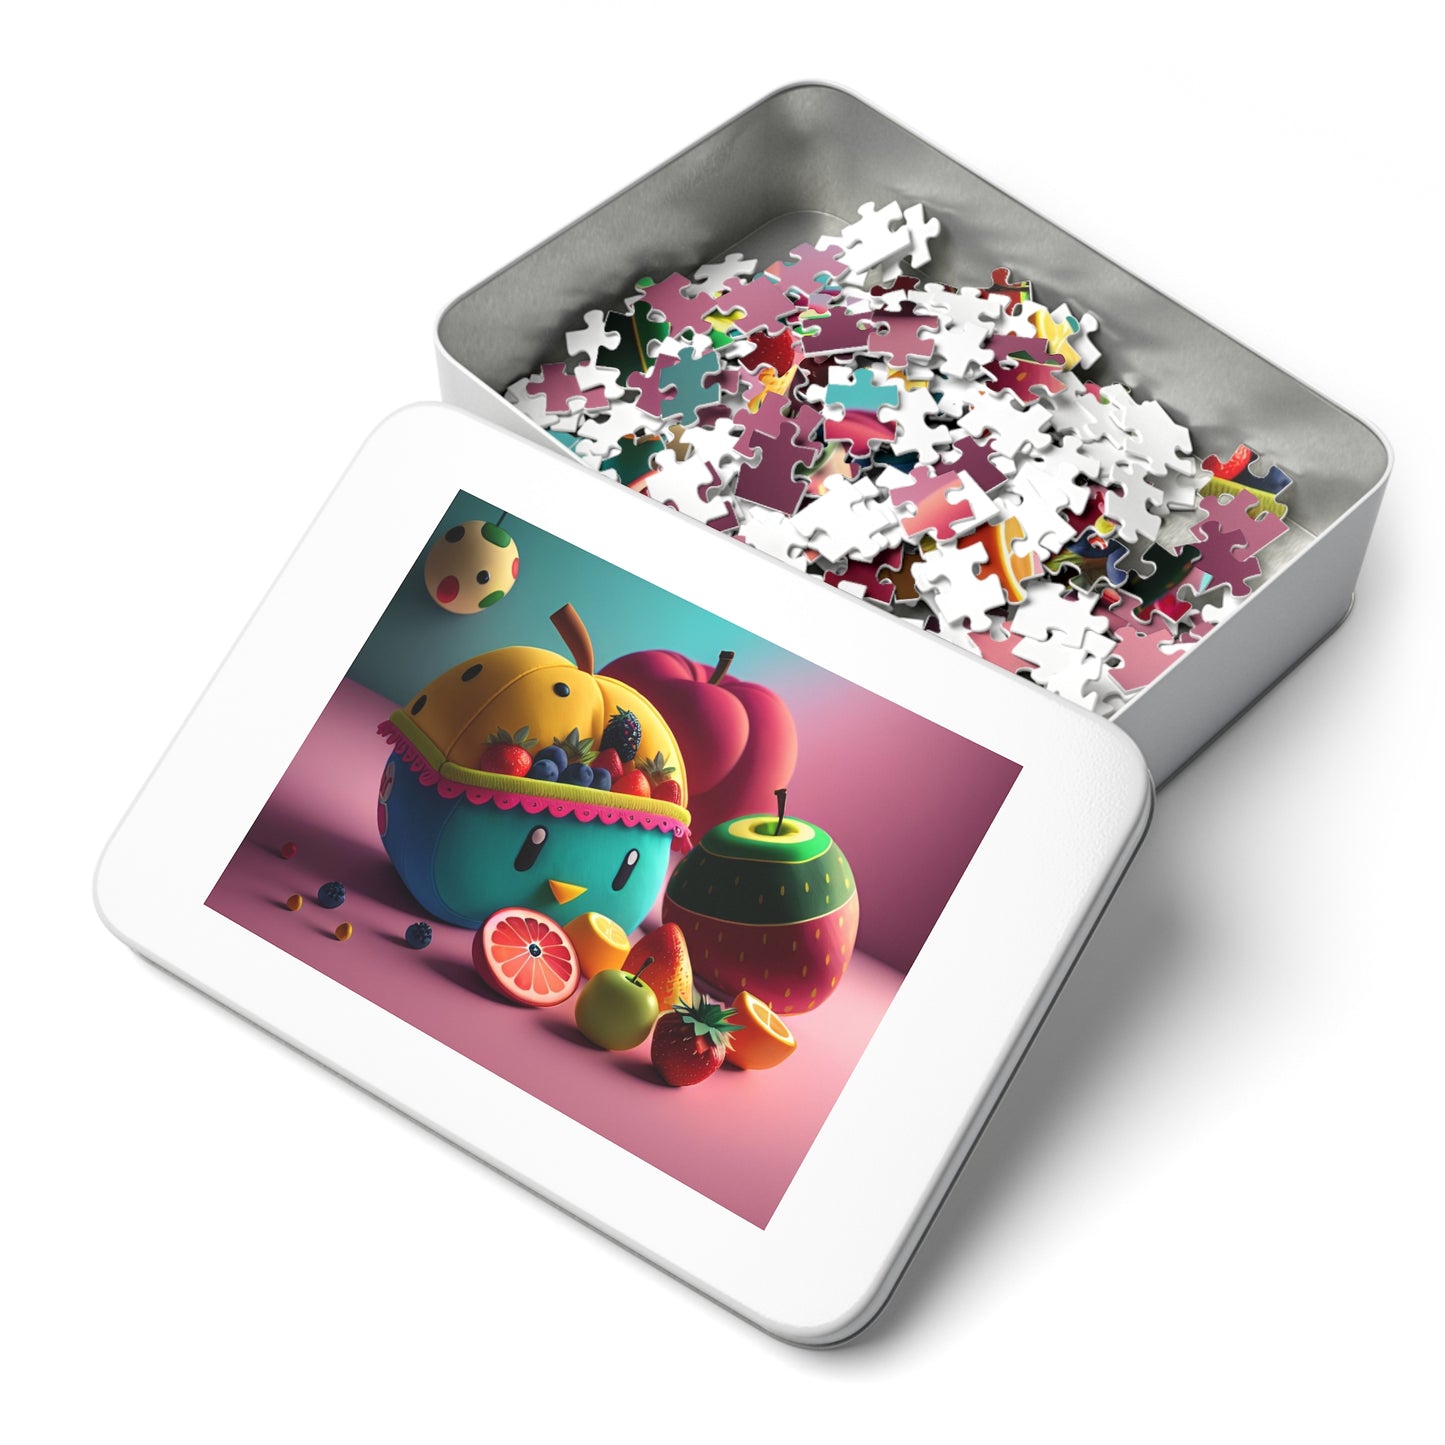 Video Game Inspired Jigsaw Puzzle, 252-Piece